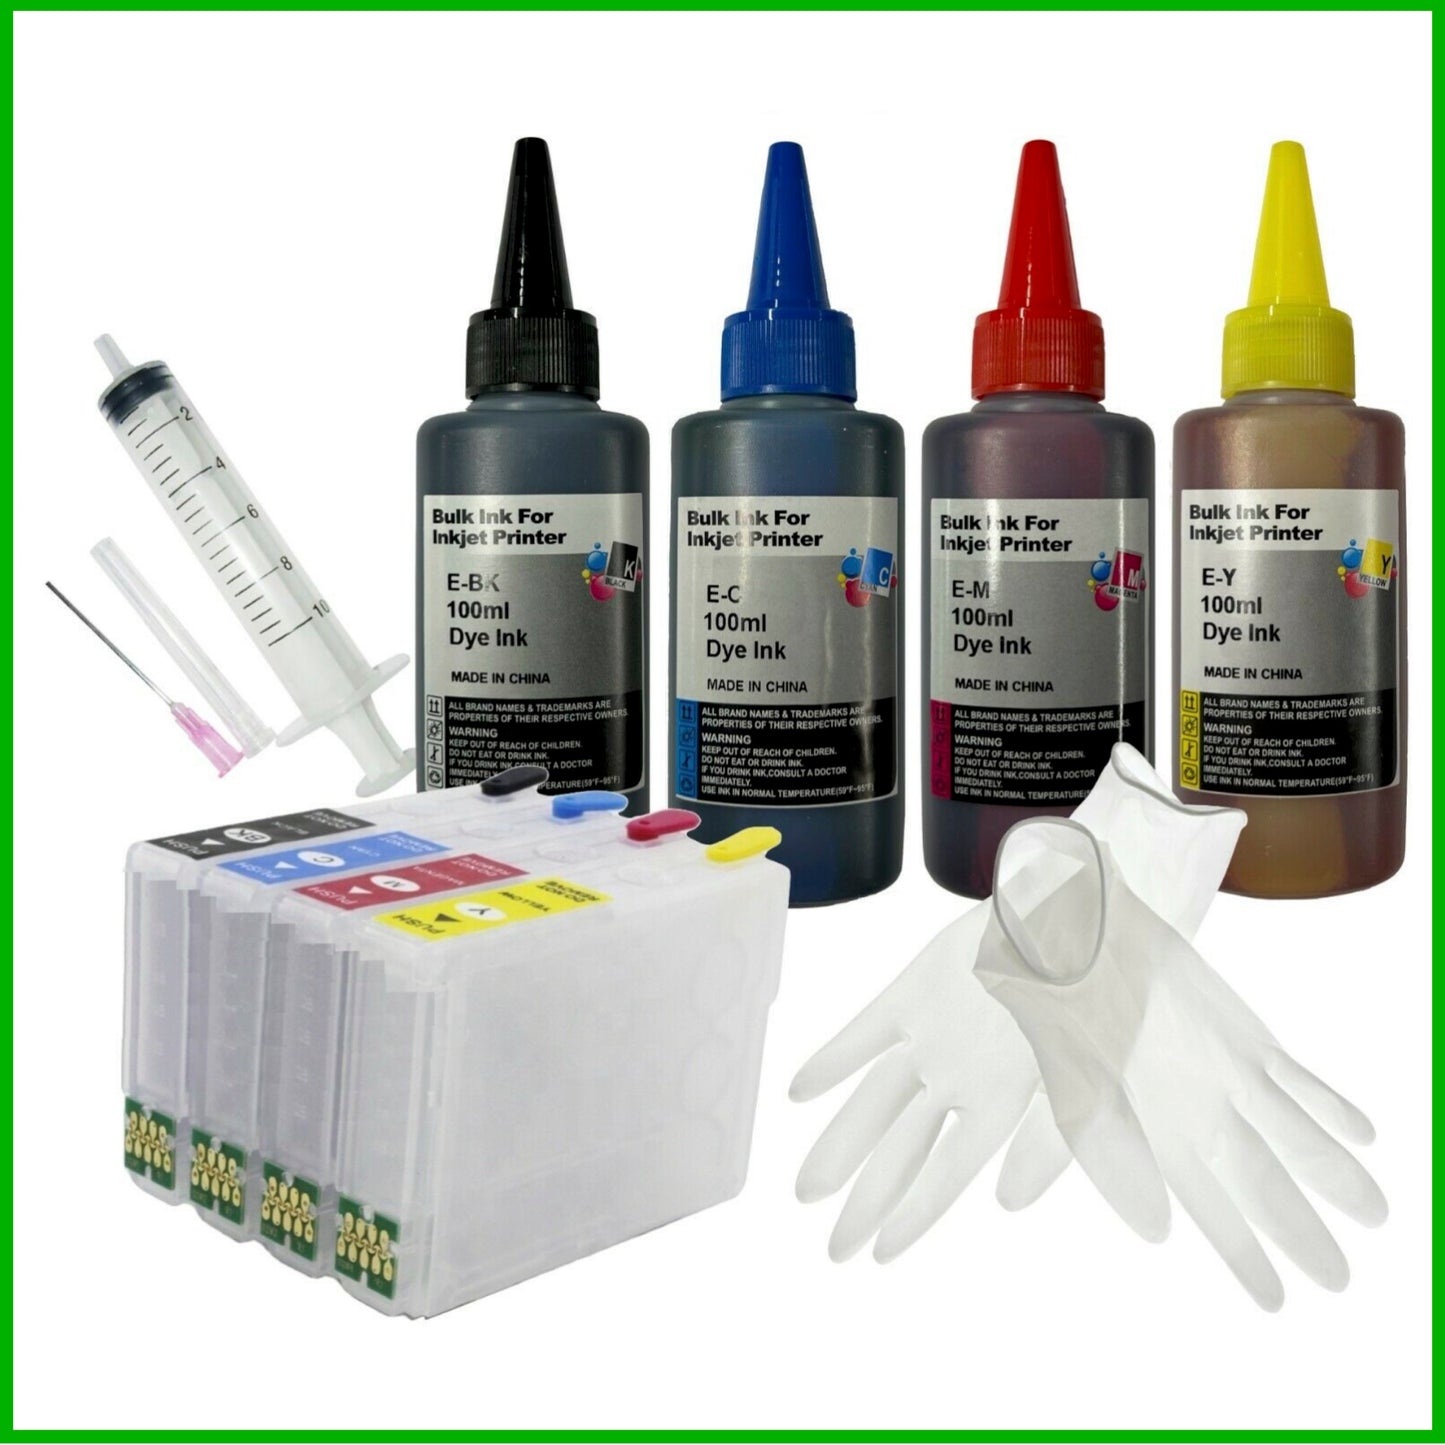 Refill Starter Kit - 502XL Cartridges with ARC Chip & Ink for Epson Expression & WorkForce